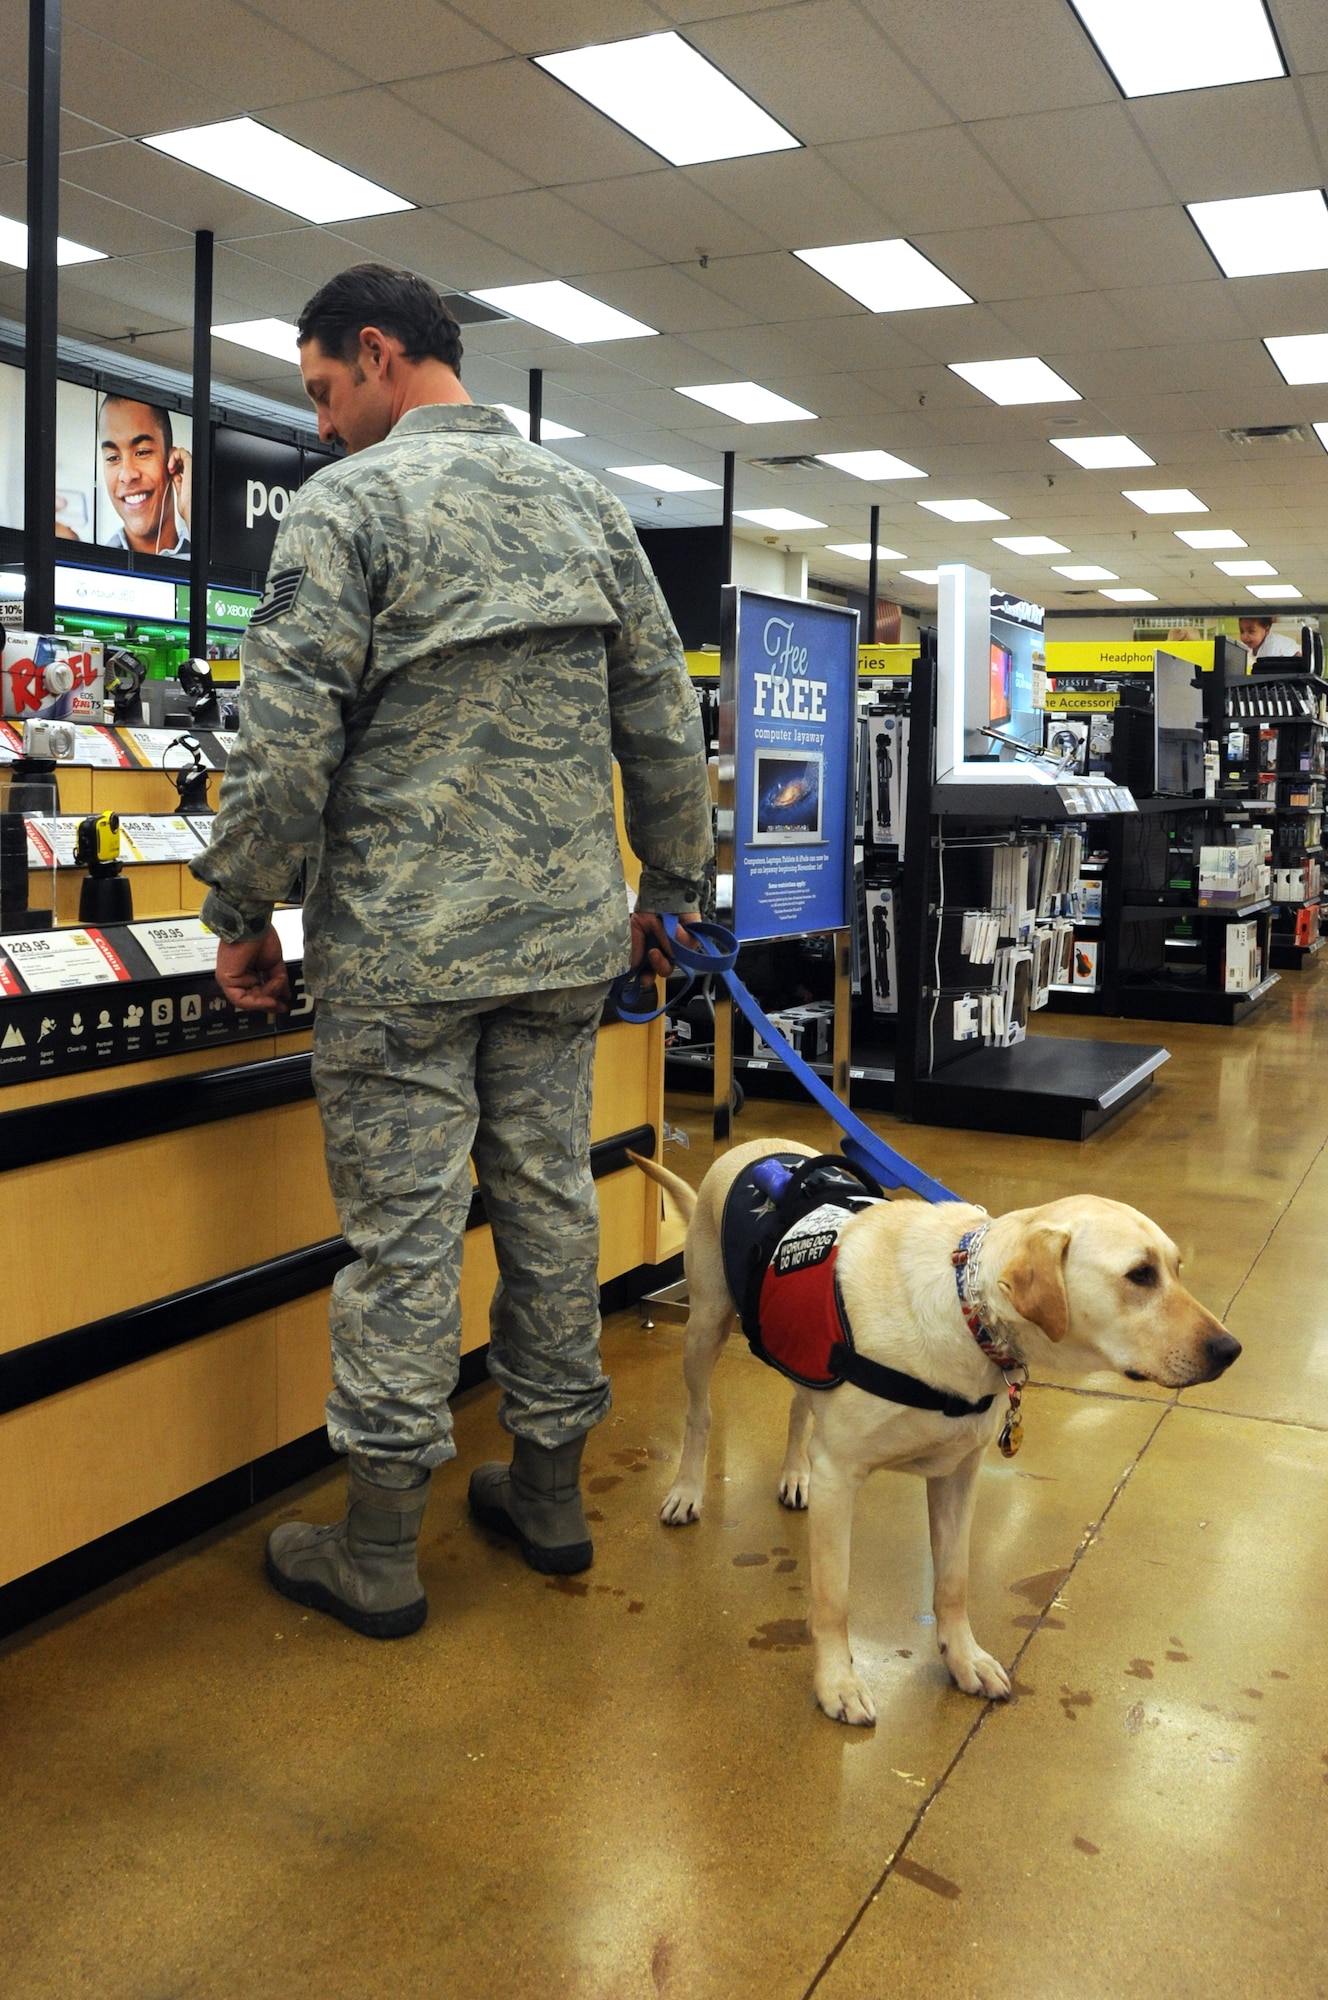 Zeus, a yellow labrador, has Tech. Sgt. Cory Anderson's back as Anderson shops in the Exchange on Grand Forks Air Force Base, N.D., November 18, 2014. Zeus is a post-traumatic stress disorder service dog who has been trained to respond to various commands in order to assist Anderson. (U.S. Air Force photo/Staff Sgt. David Dobrydney)